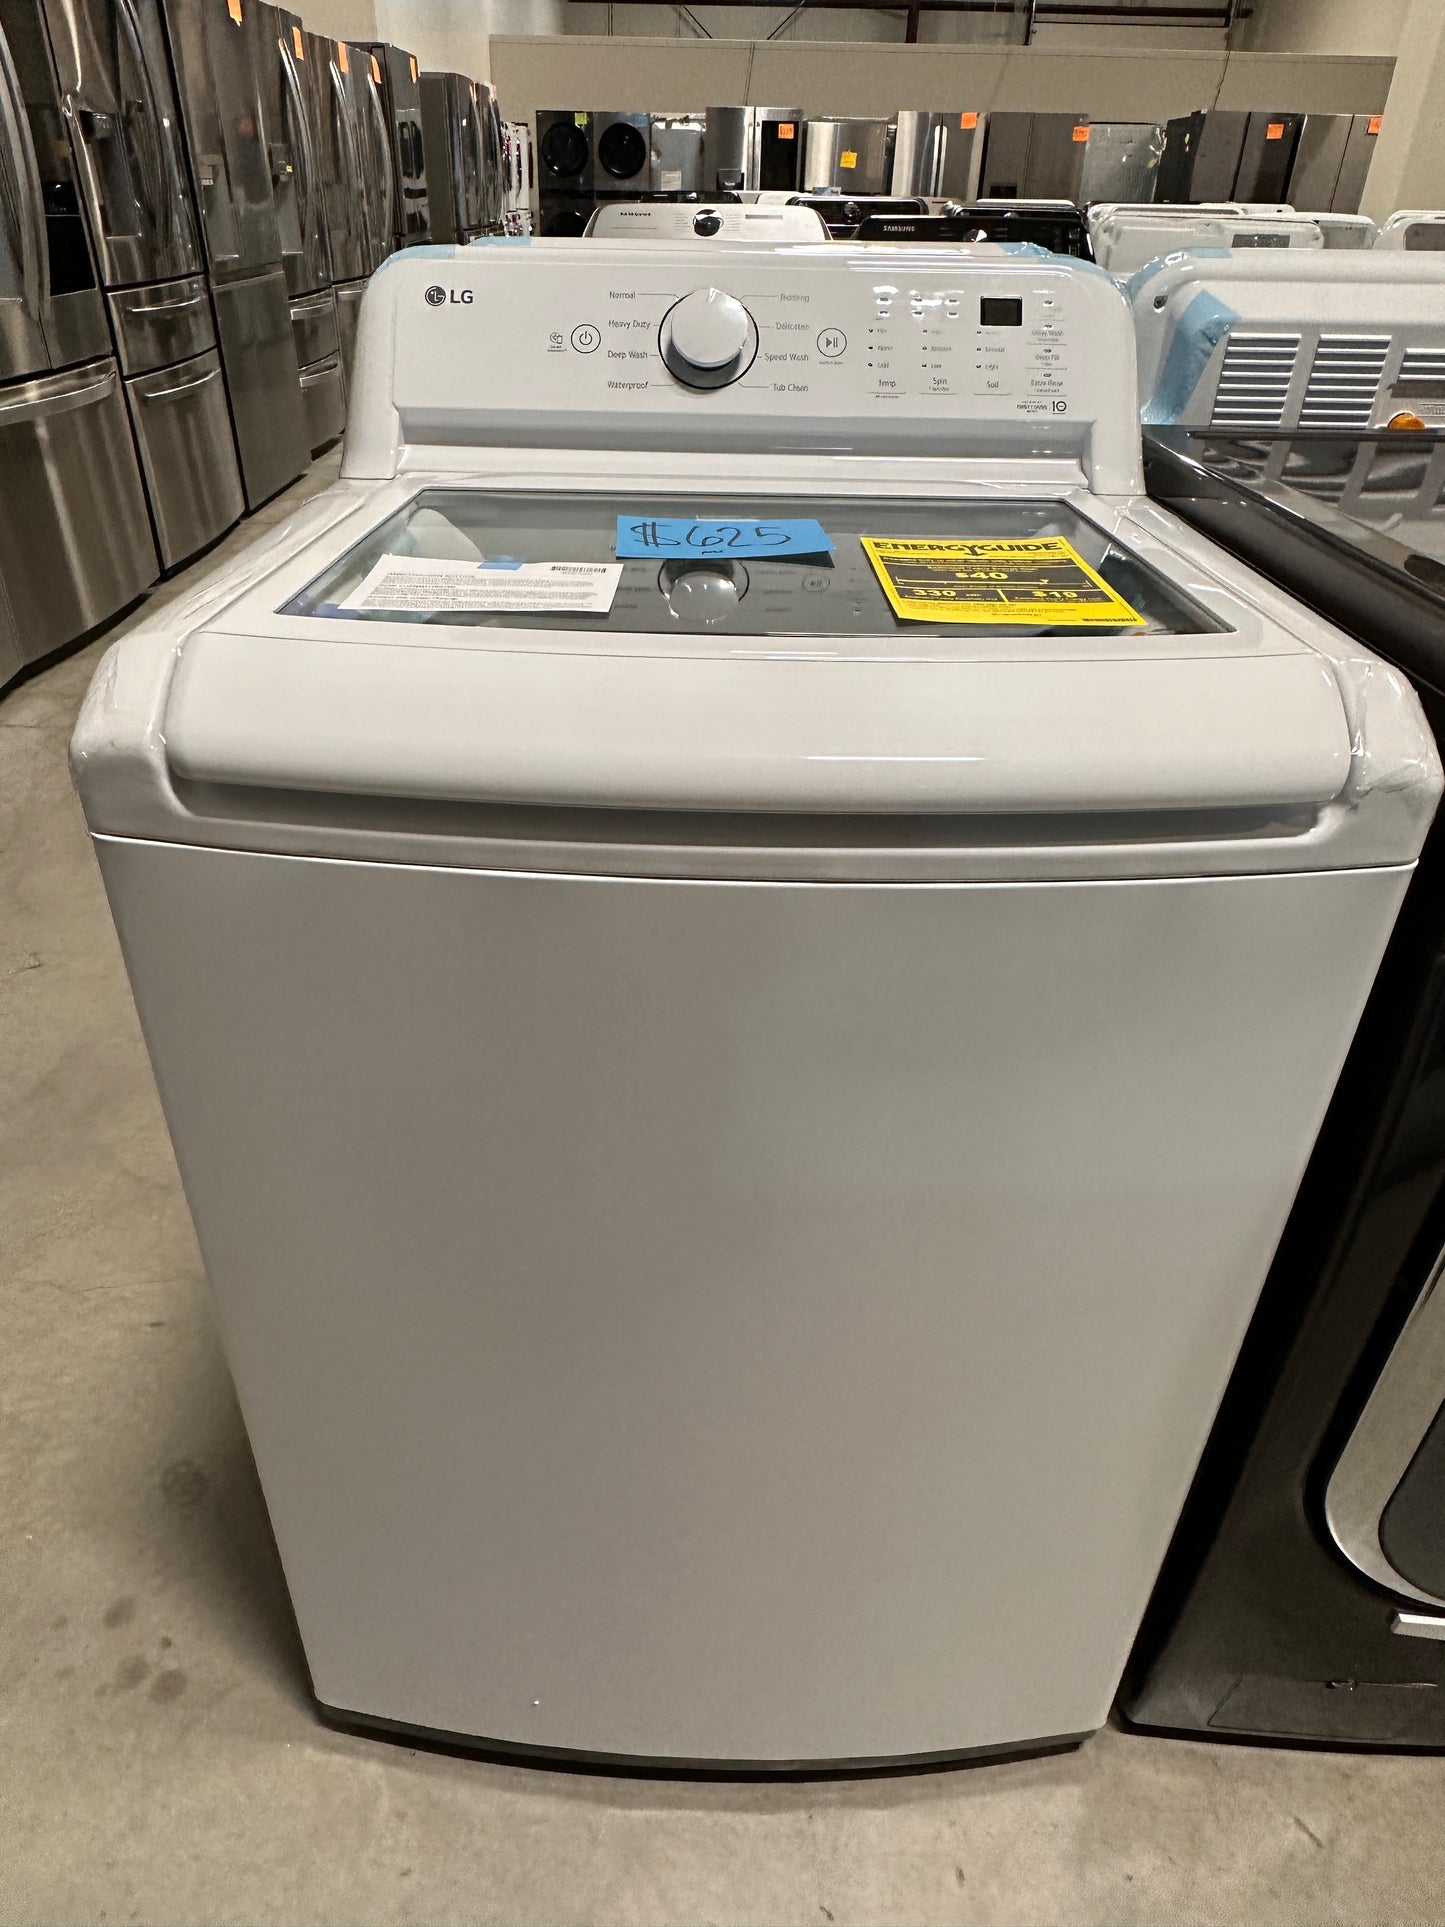 BRAND NEW TOP LOAD WASHER- SMART LG WASHER - WAS12746